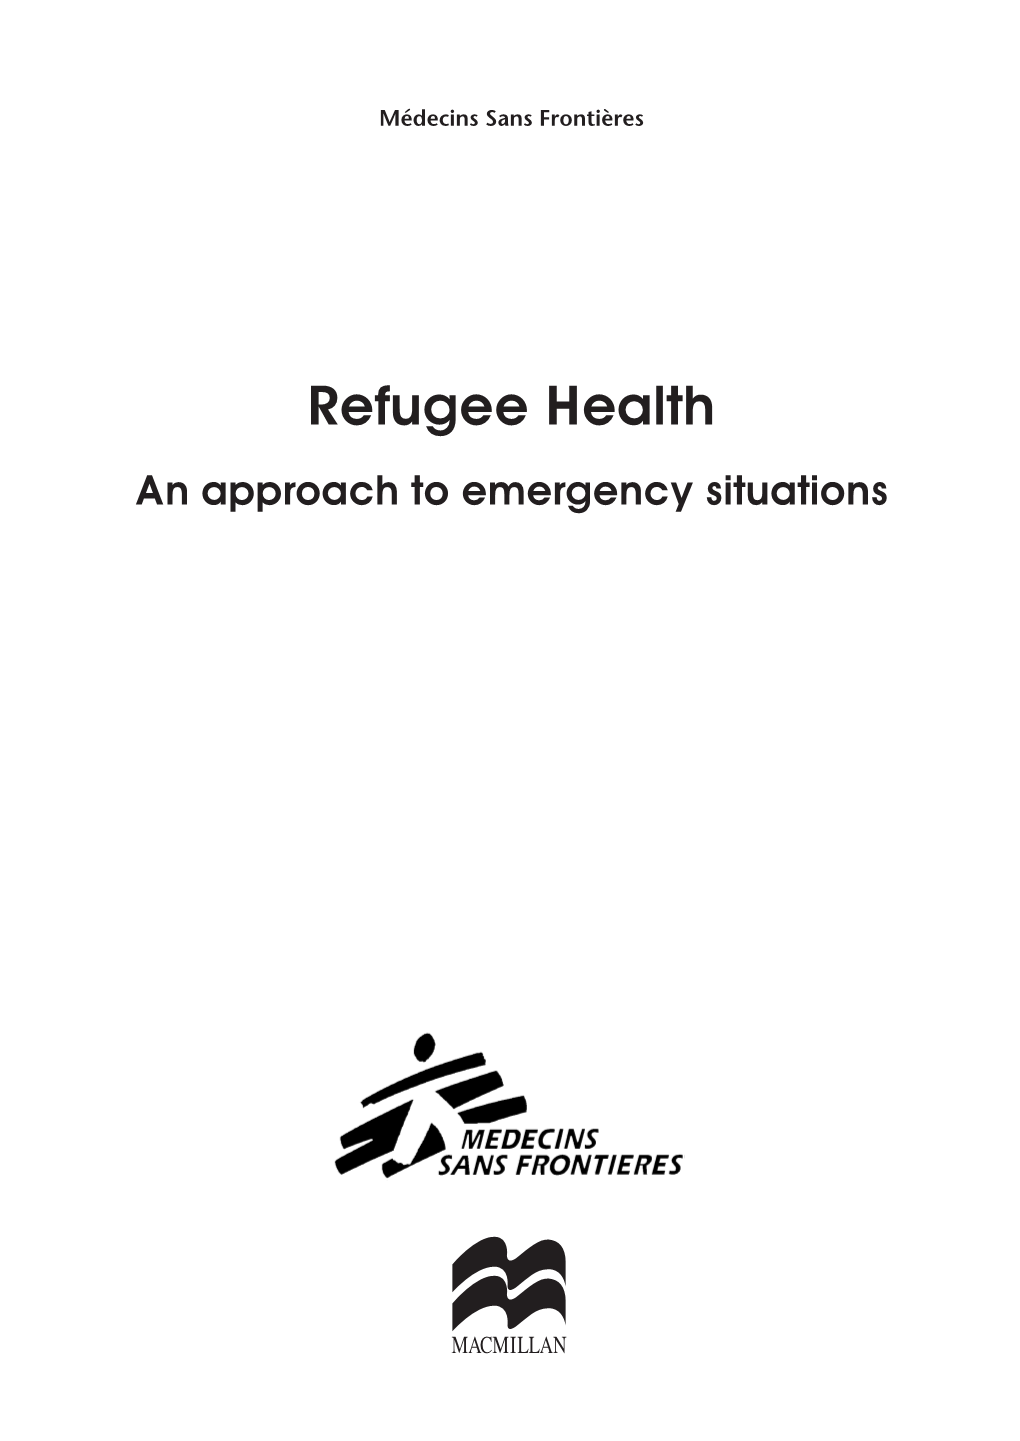 Refugee Health an Approach to Emergency Situations